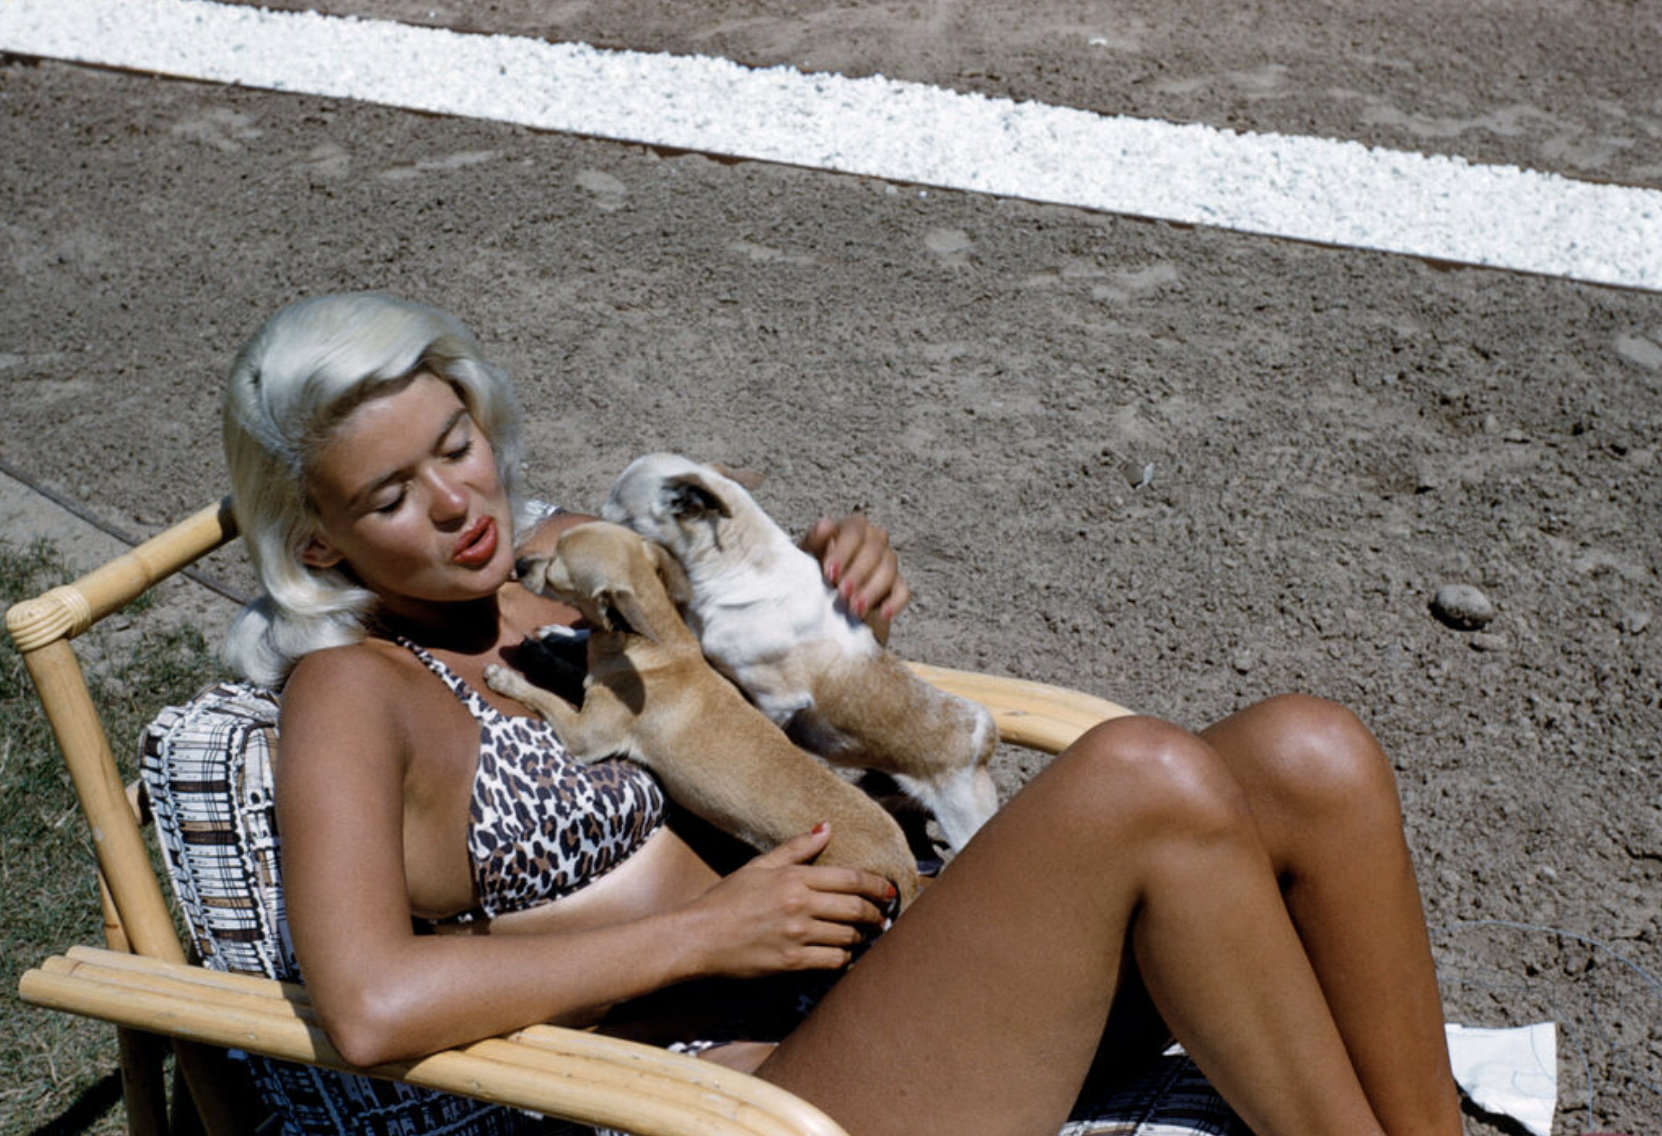 Actress Jayne Mansfield sits in a beach chair and holds two small dogs on her lap